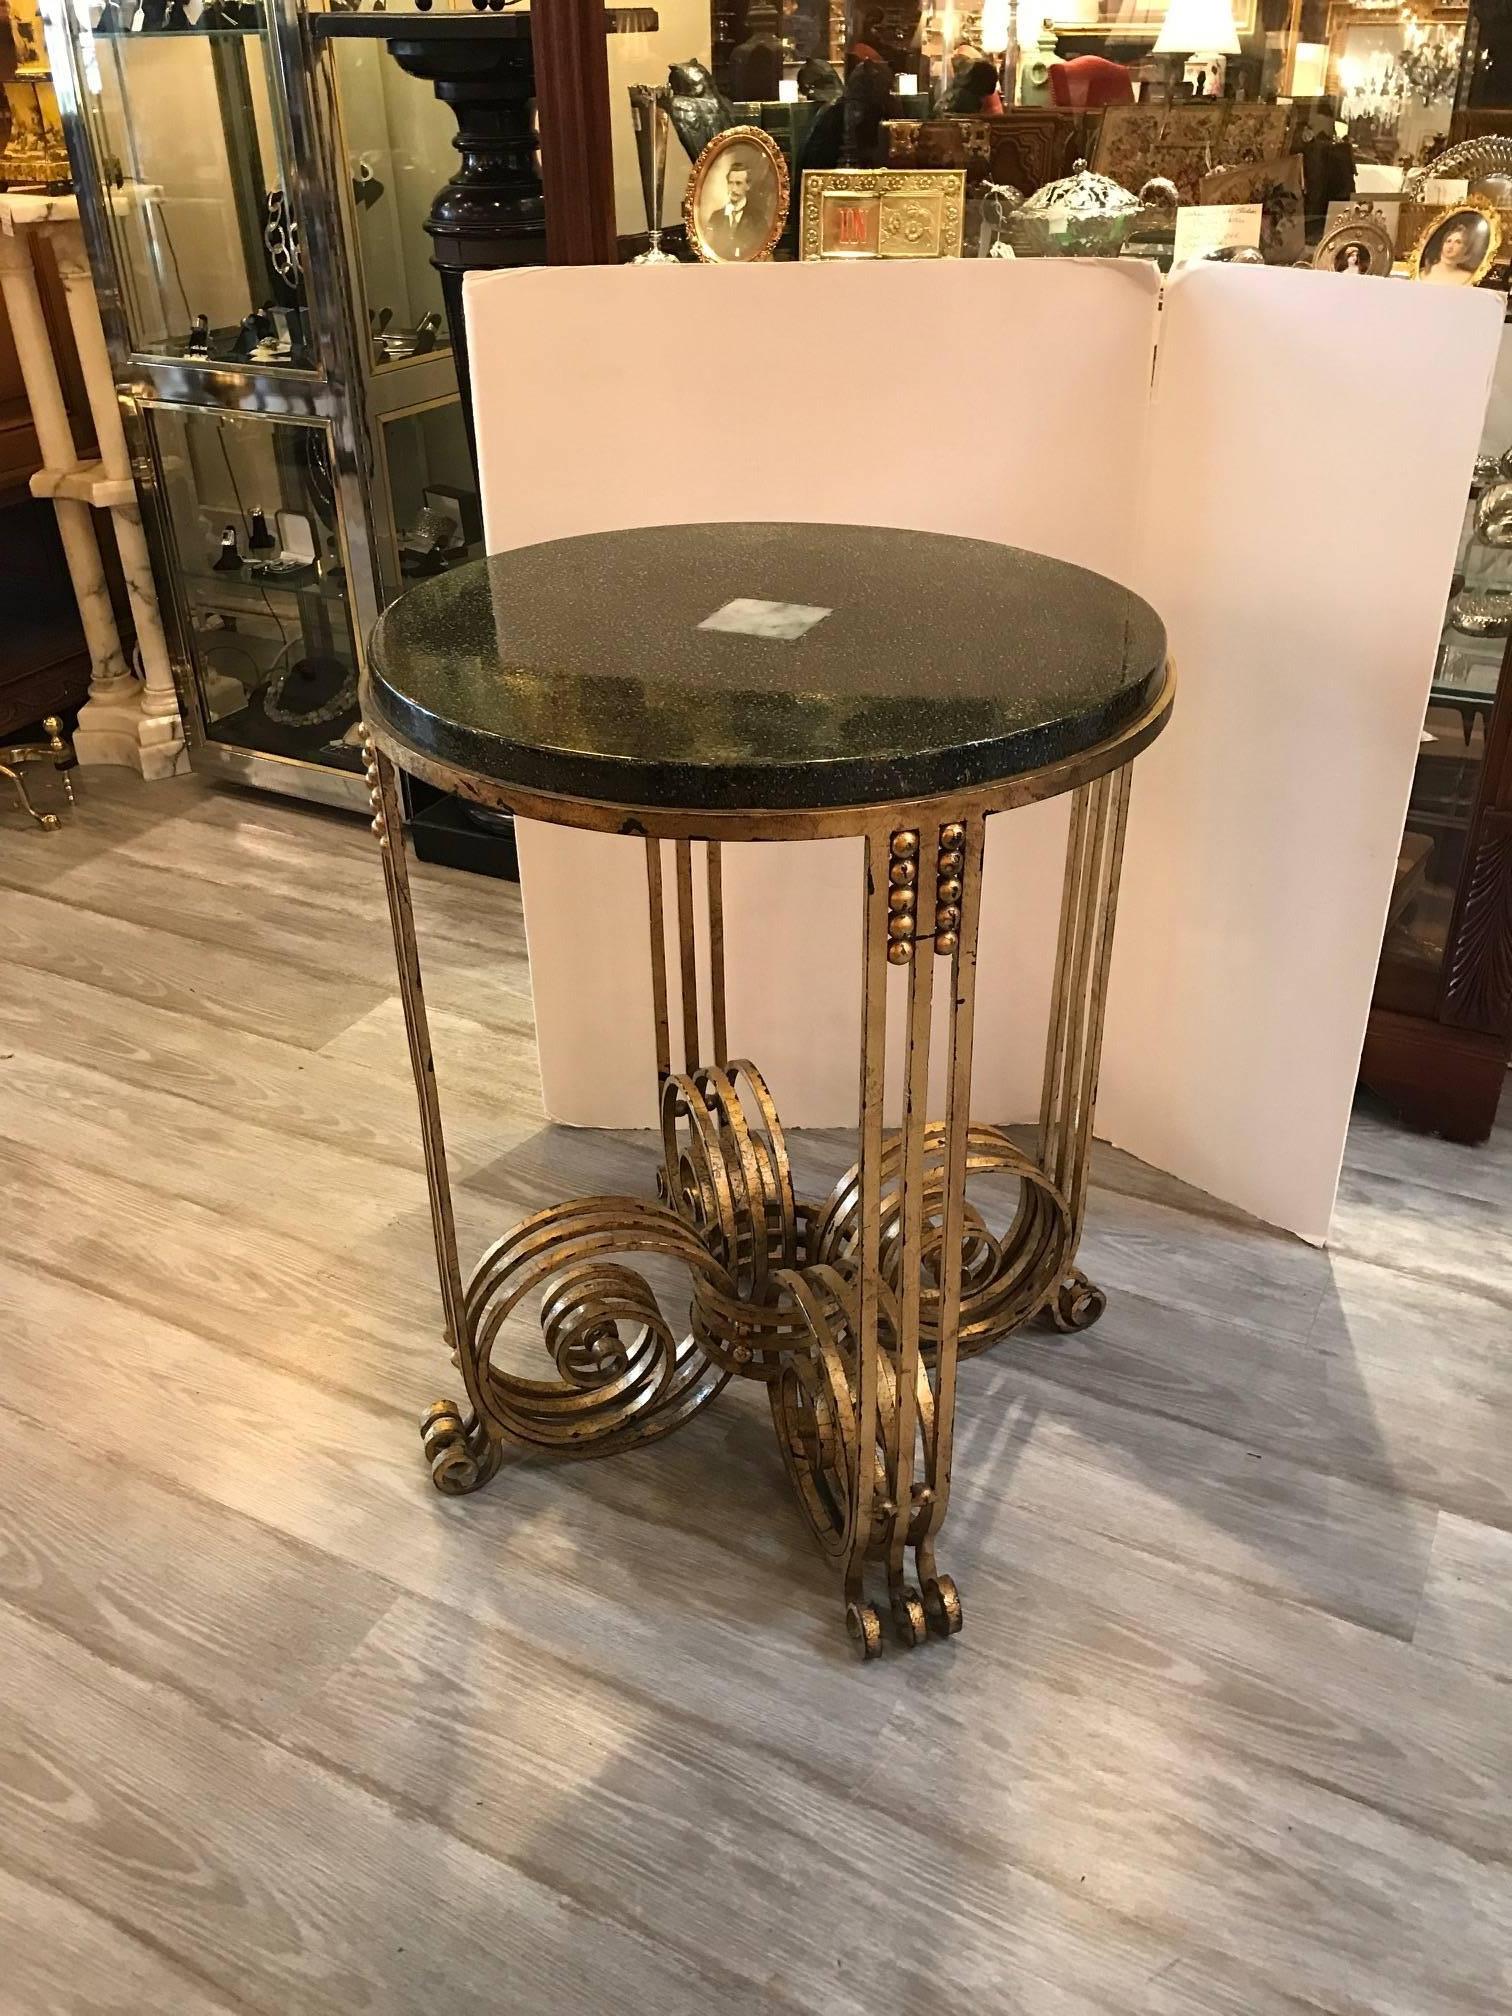 Fabulous French Art Deco gilt wrought iron table with hand-painted lacquer top. The top has a jade tile inset in the centre. The base is a triple layer scroll leg with the original gilding showing expected wear. The top being a multi-color Japanese